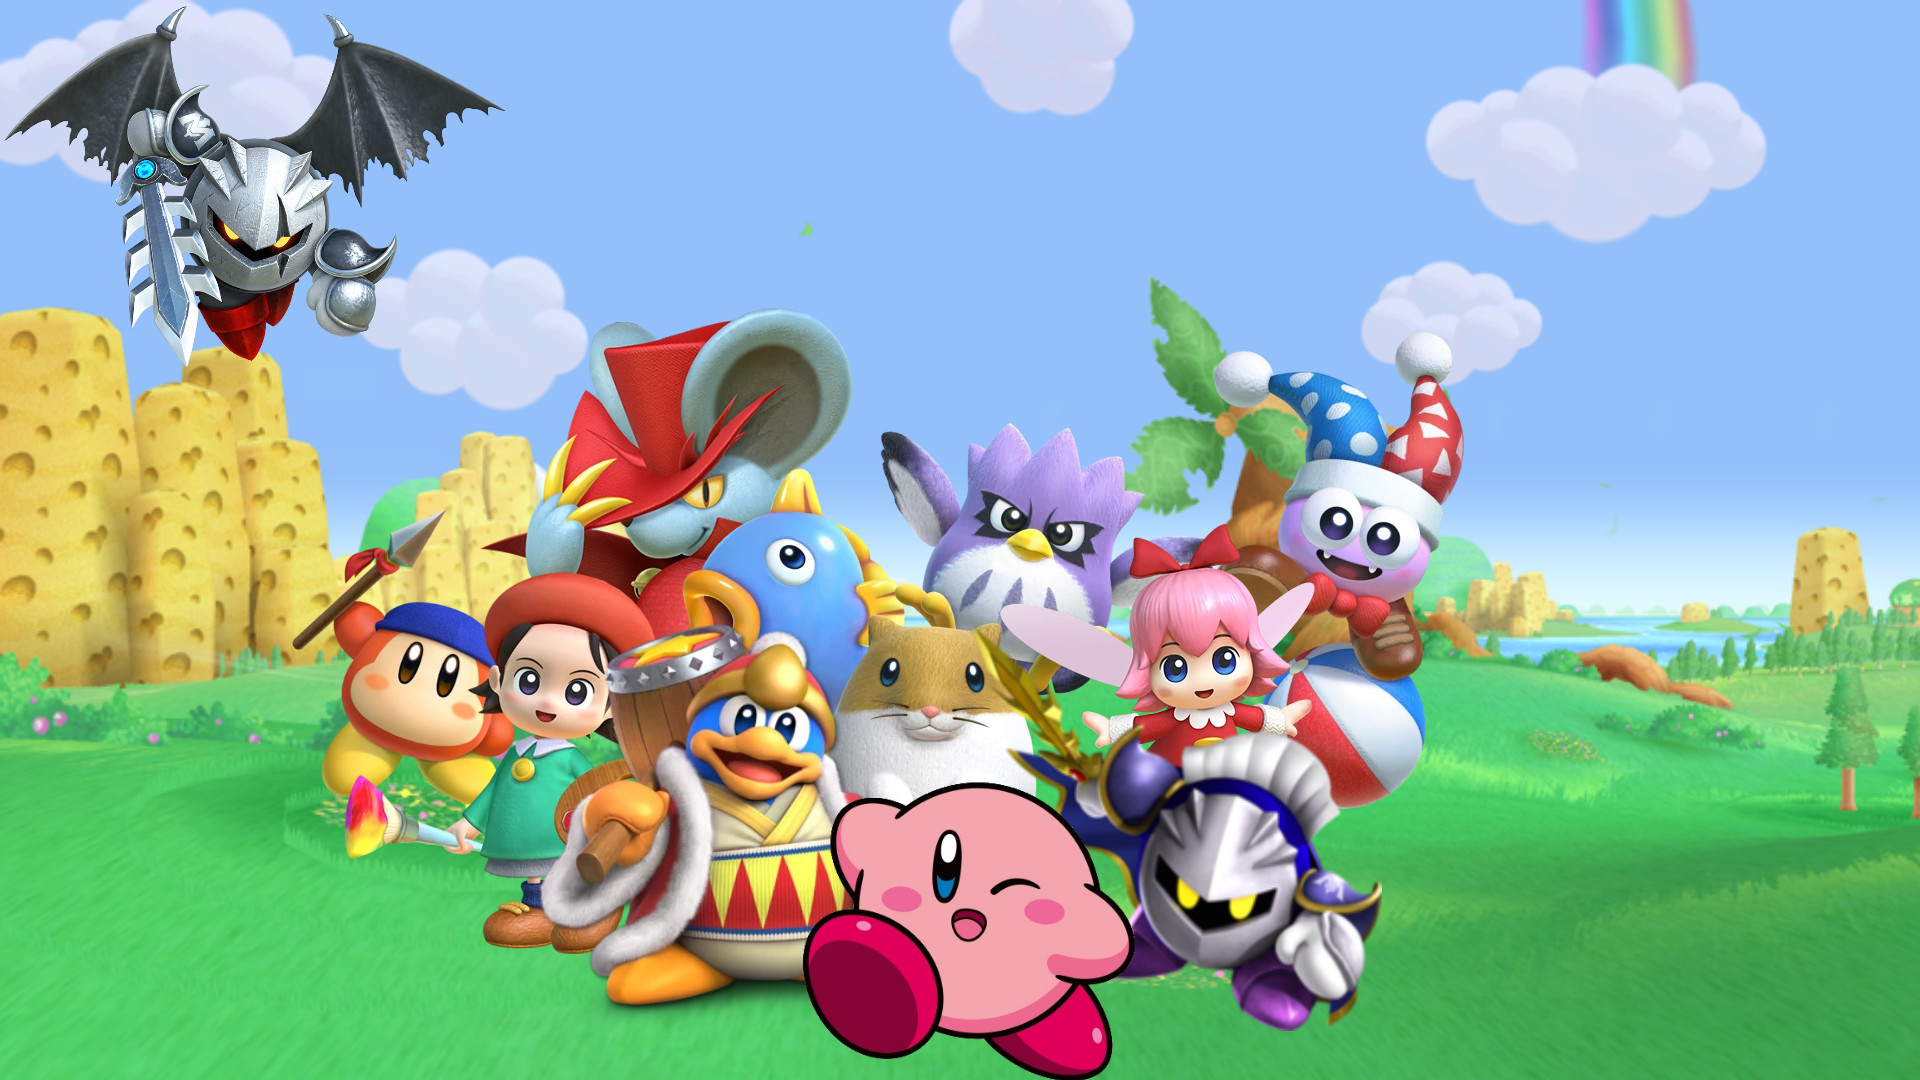 1920x1080 Kirby & Dream Friends Wallpaper (comes with  and 1366x768) - Album  on Imgur